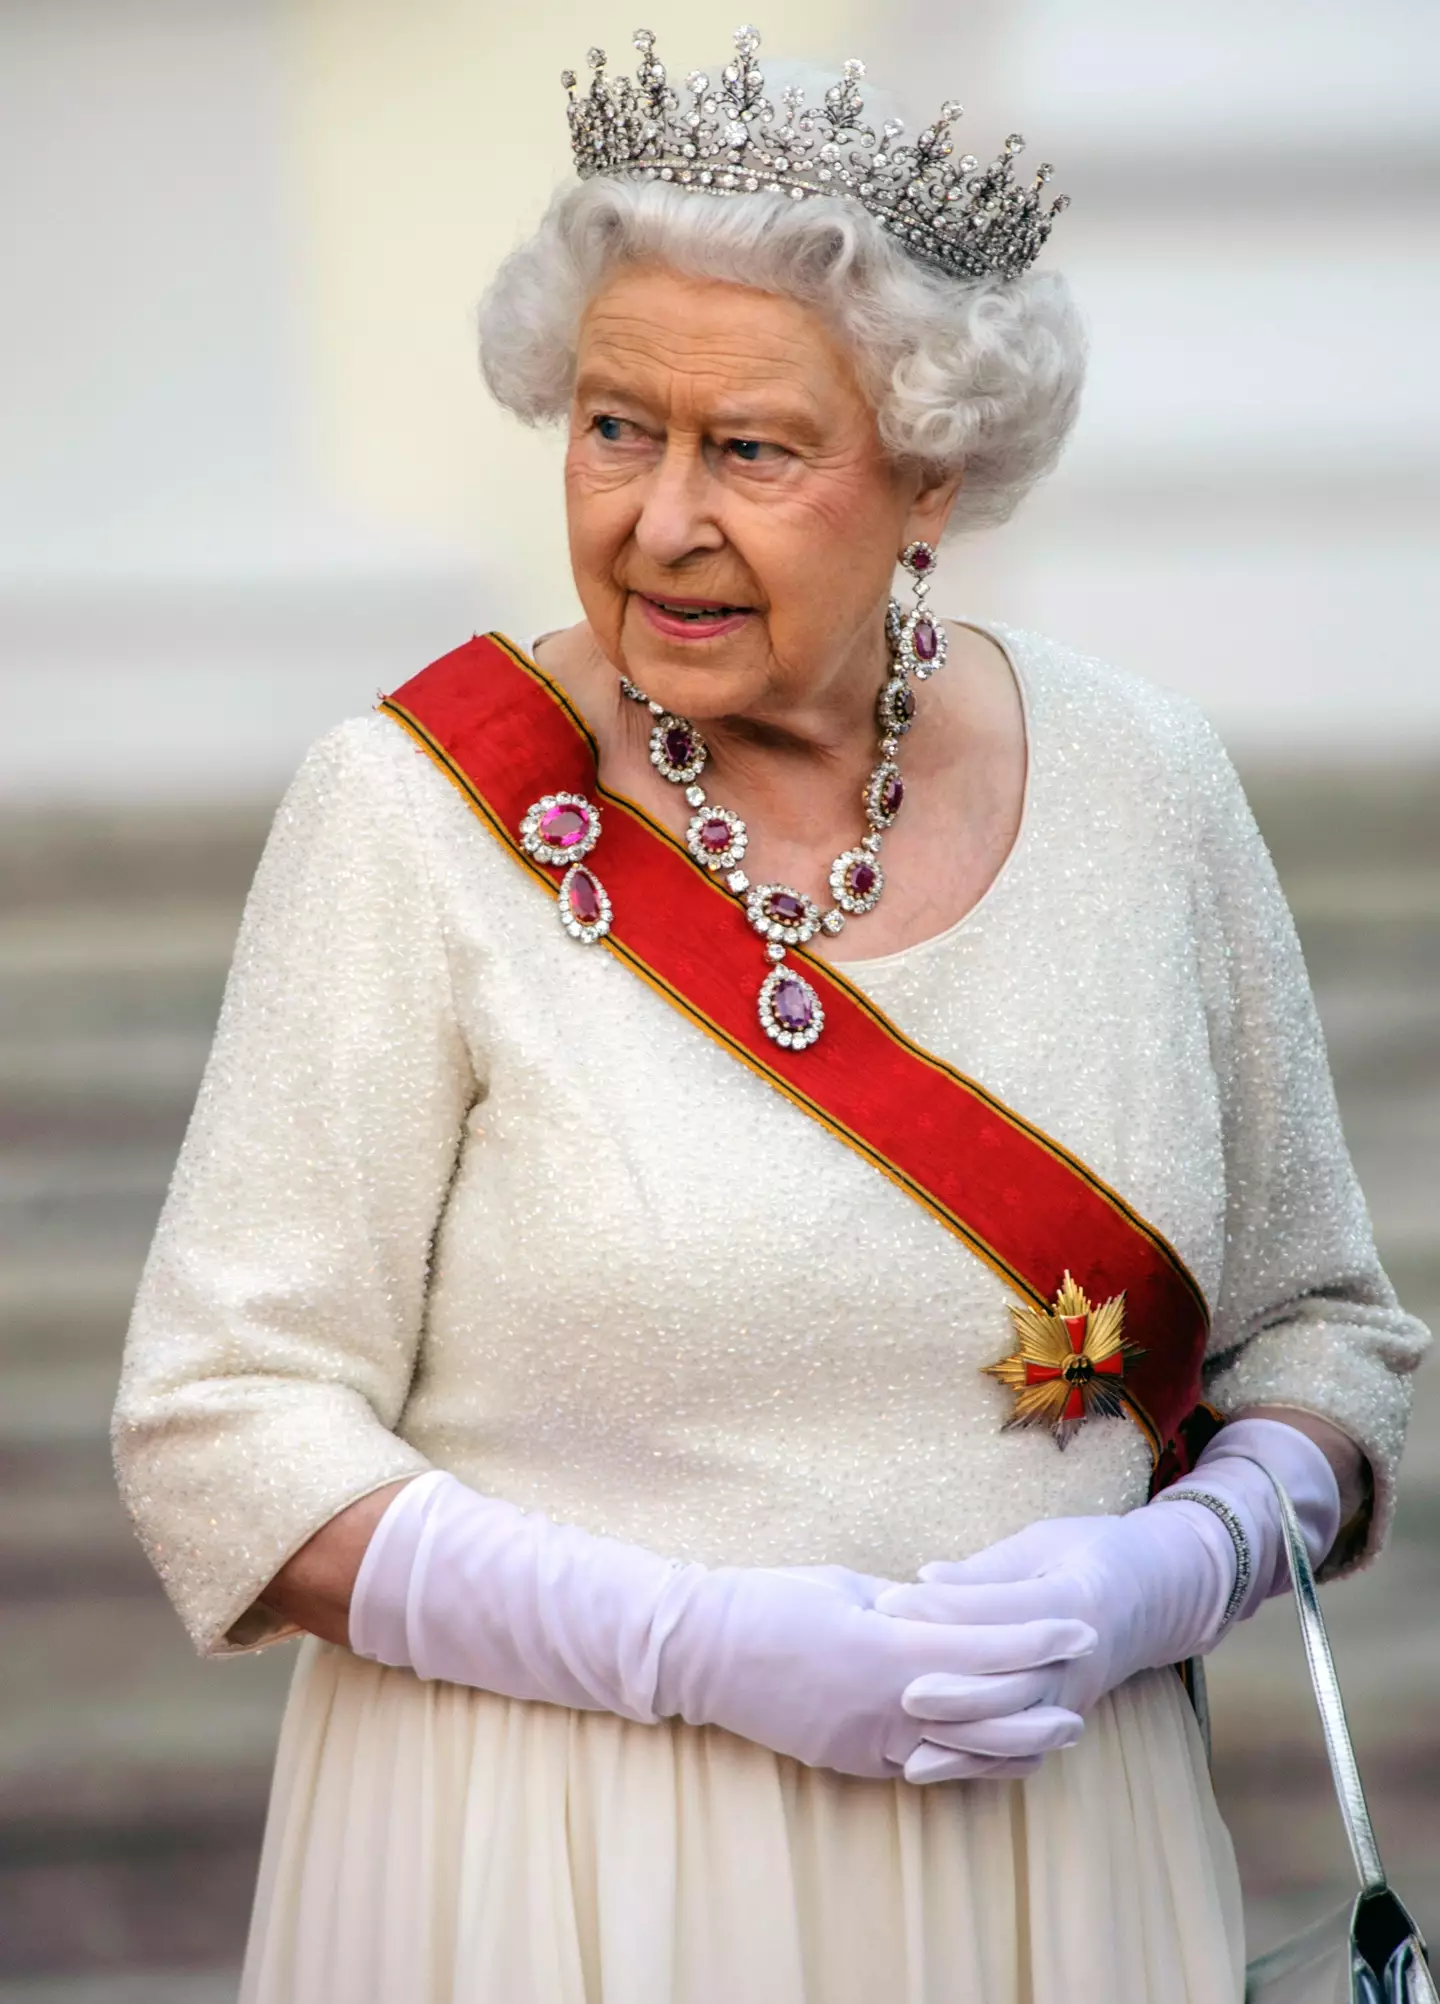 A national one-minute silence will be held in honour of the Queen, at 8pm on Sunday.